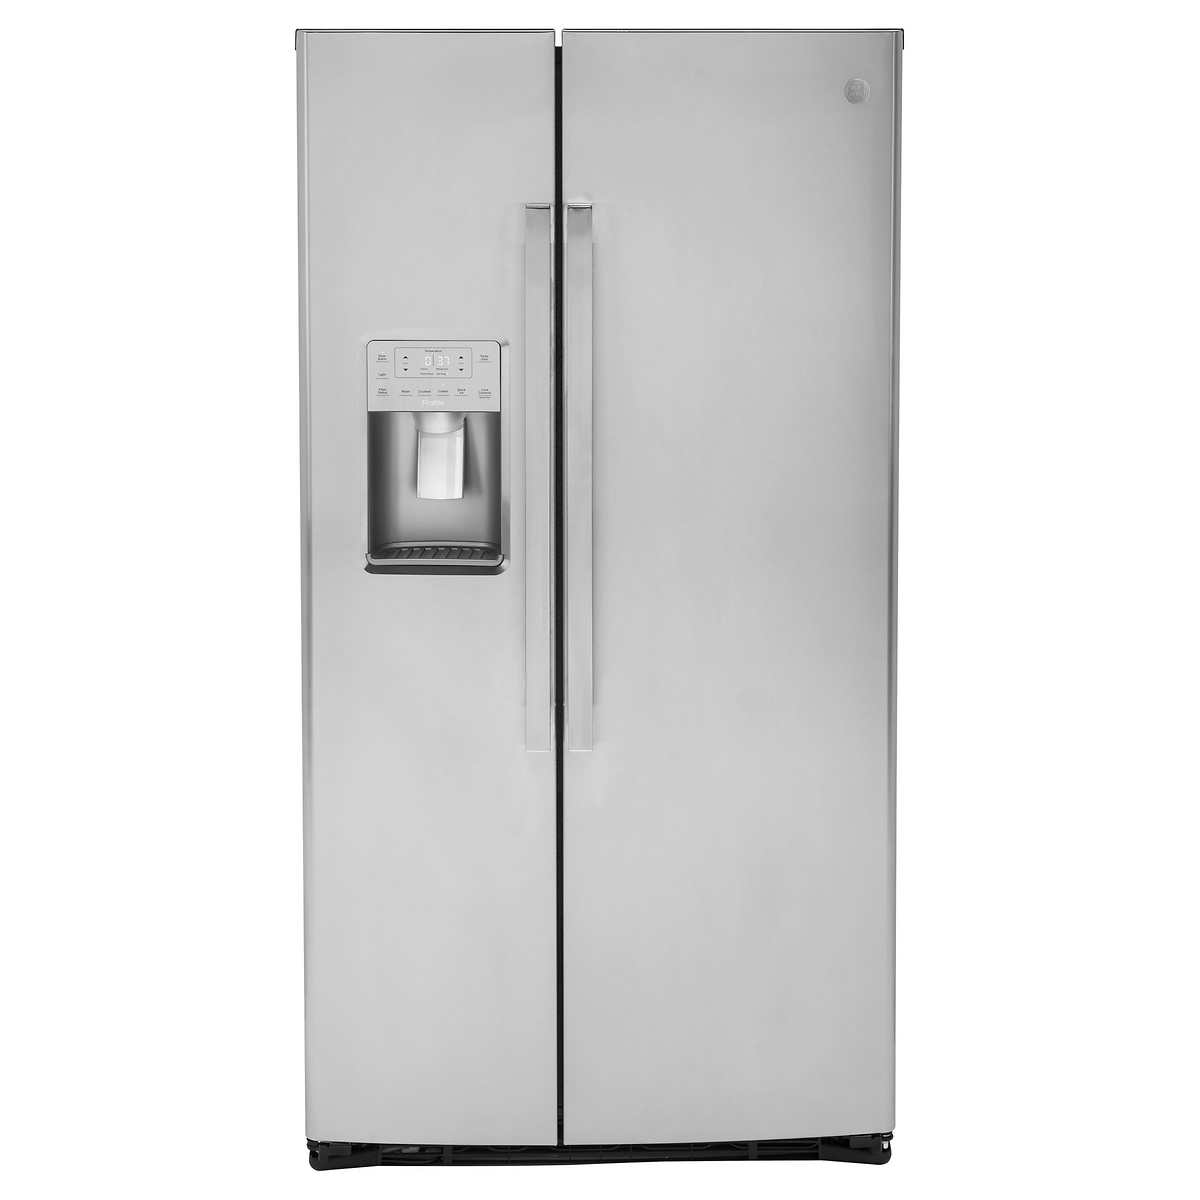 Samsung Bespoke Side-by-Side Refrigerator (28 cu. ft.) with